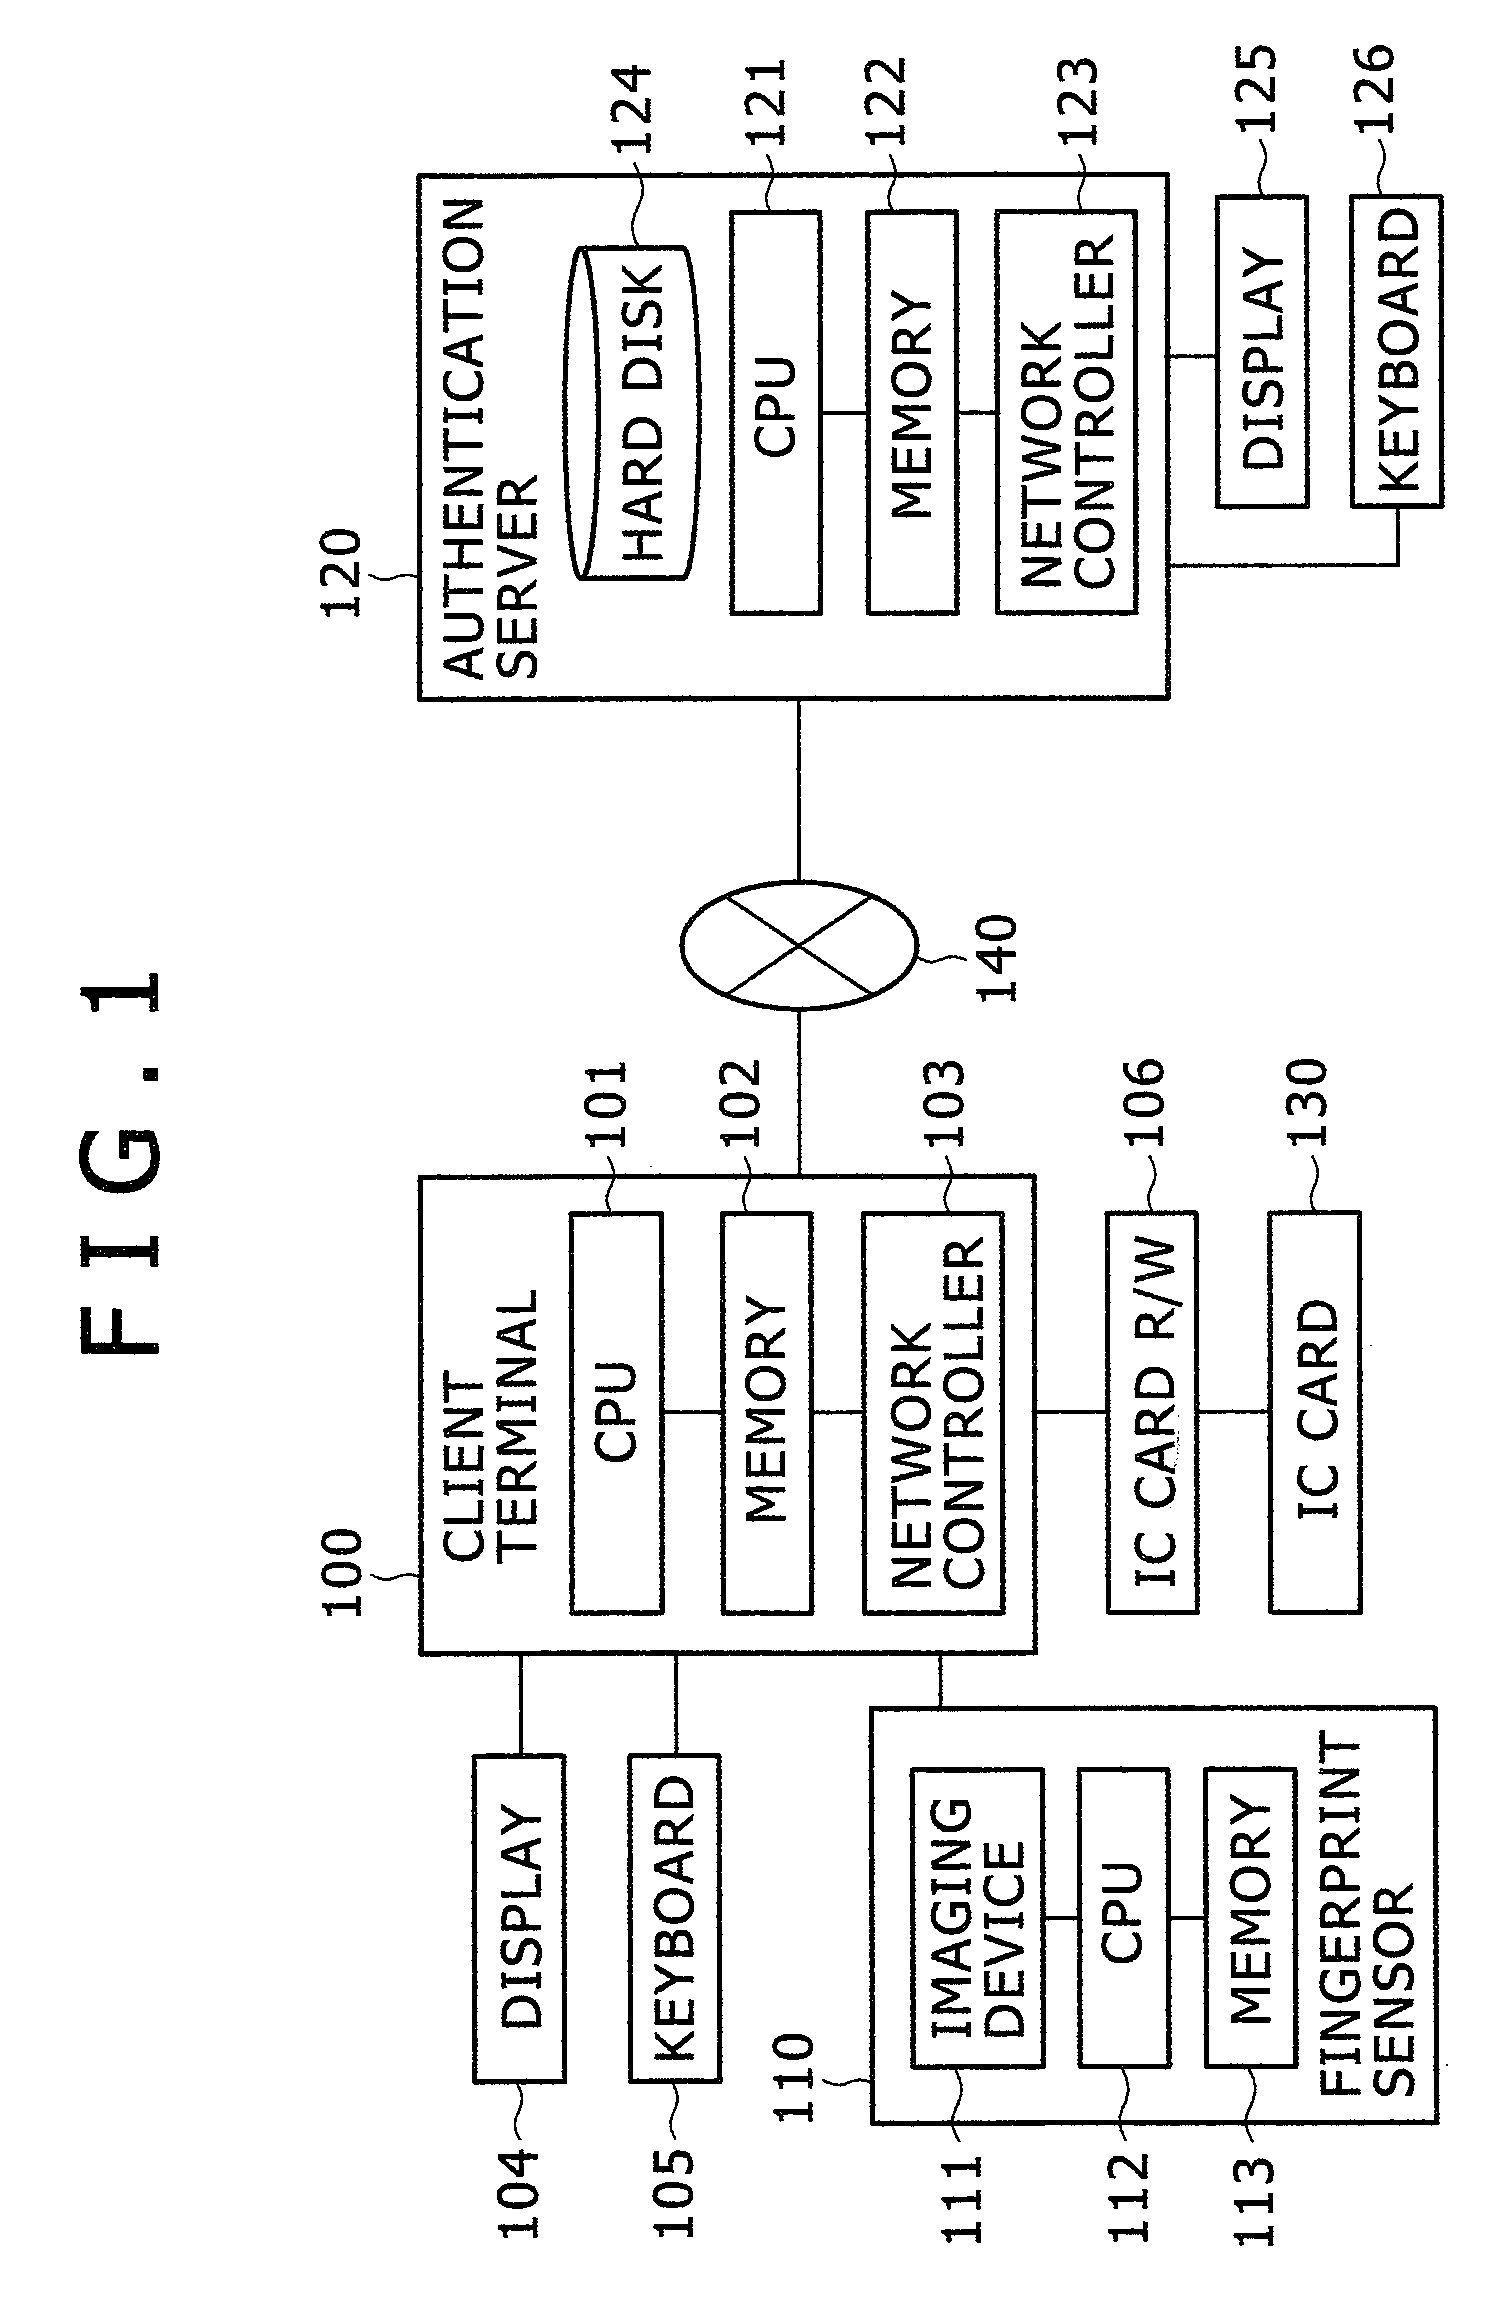 Method, system and program for authenticating a user by biometric information